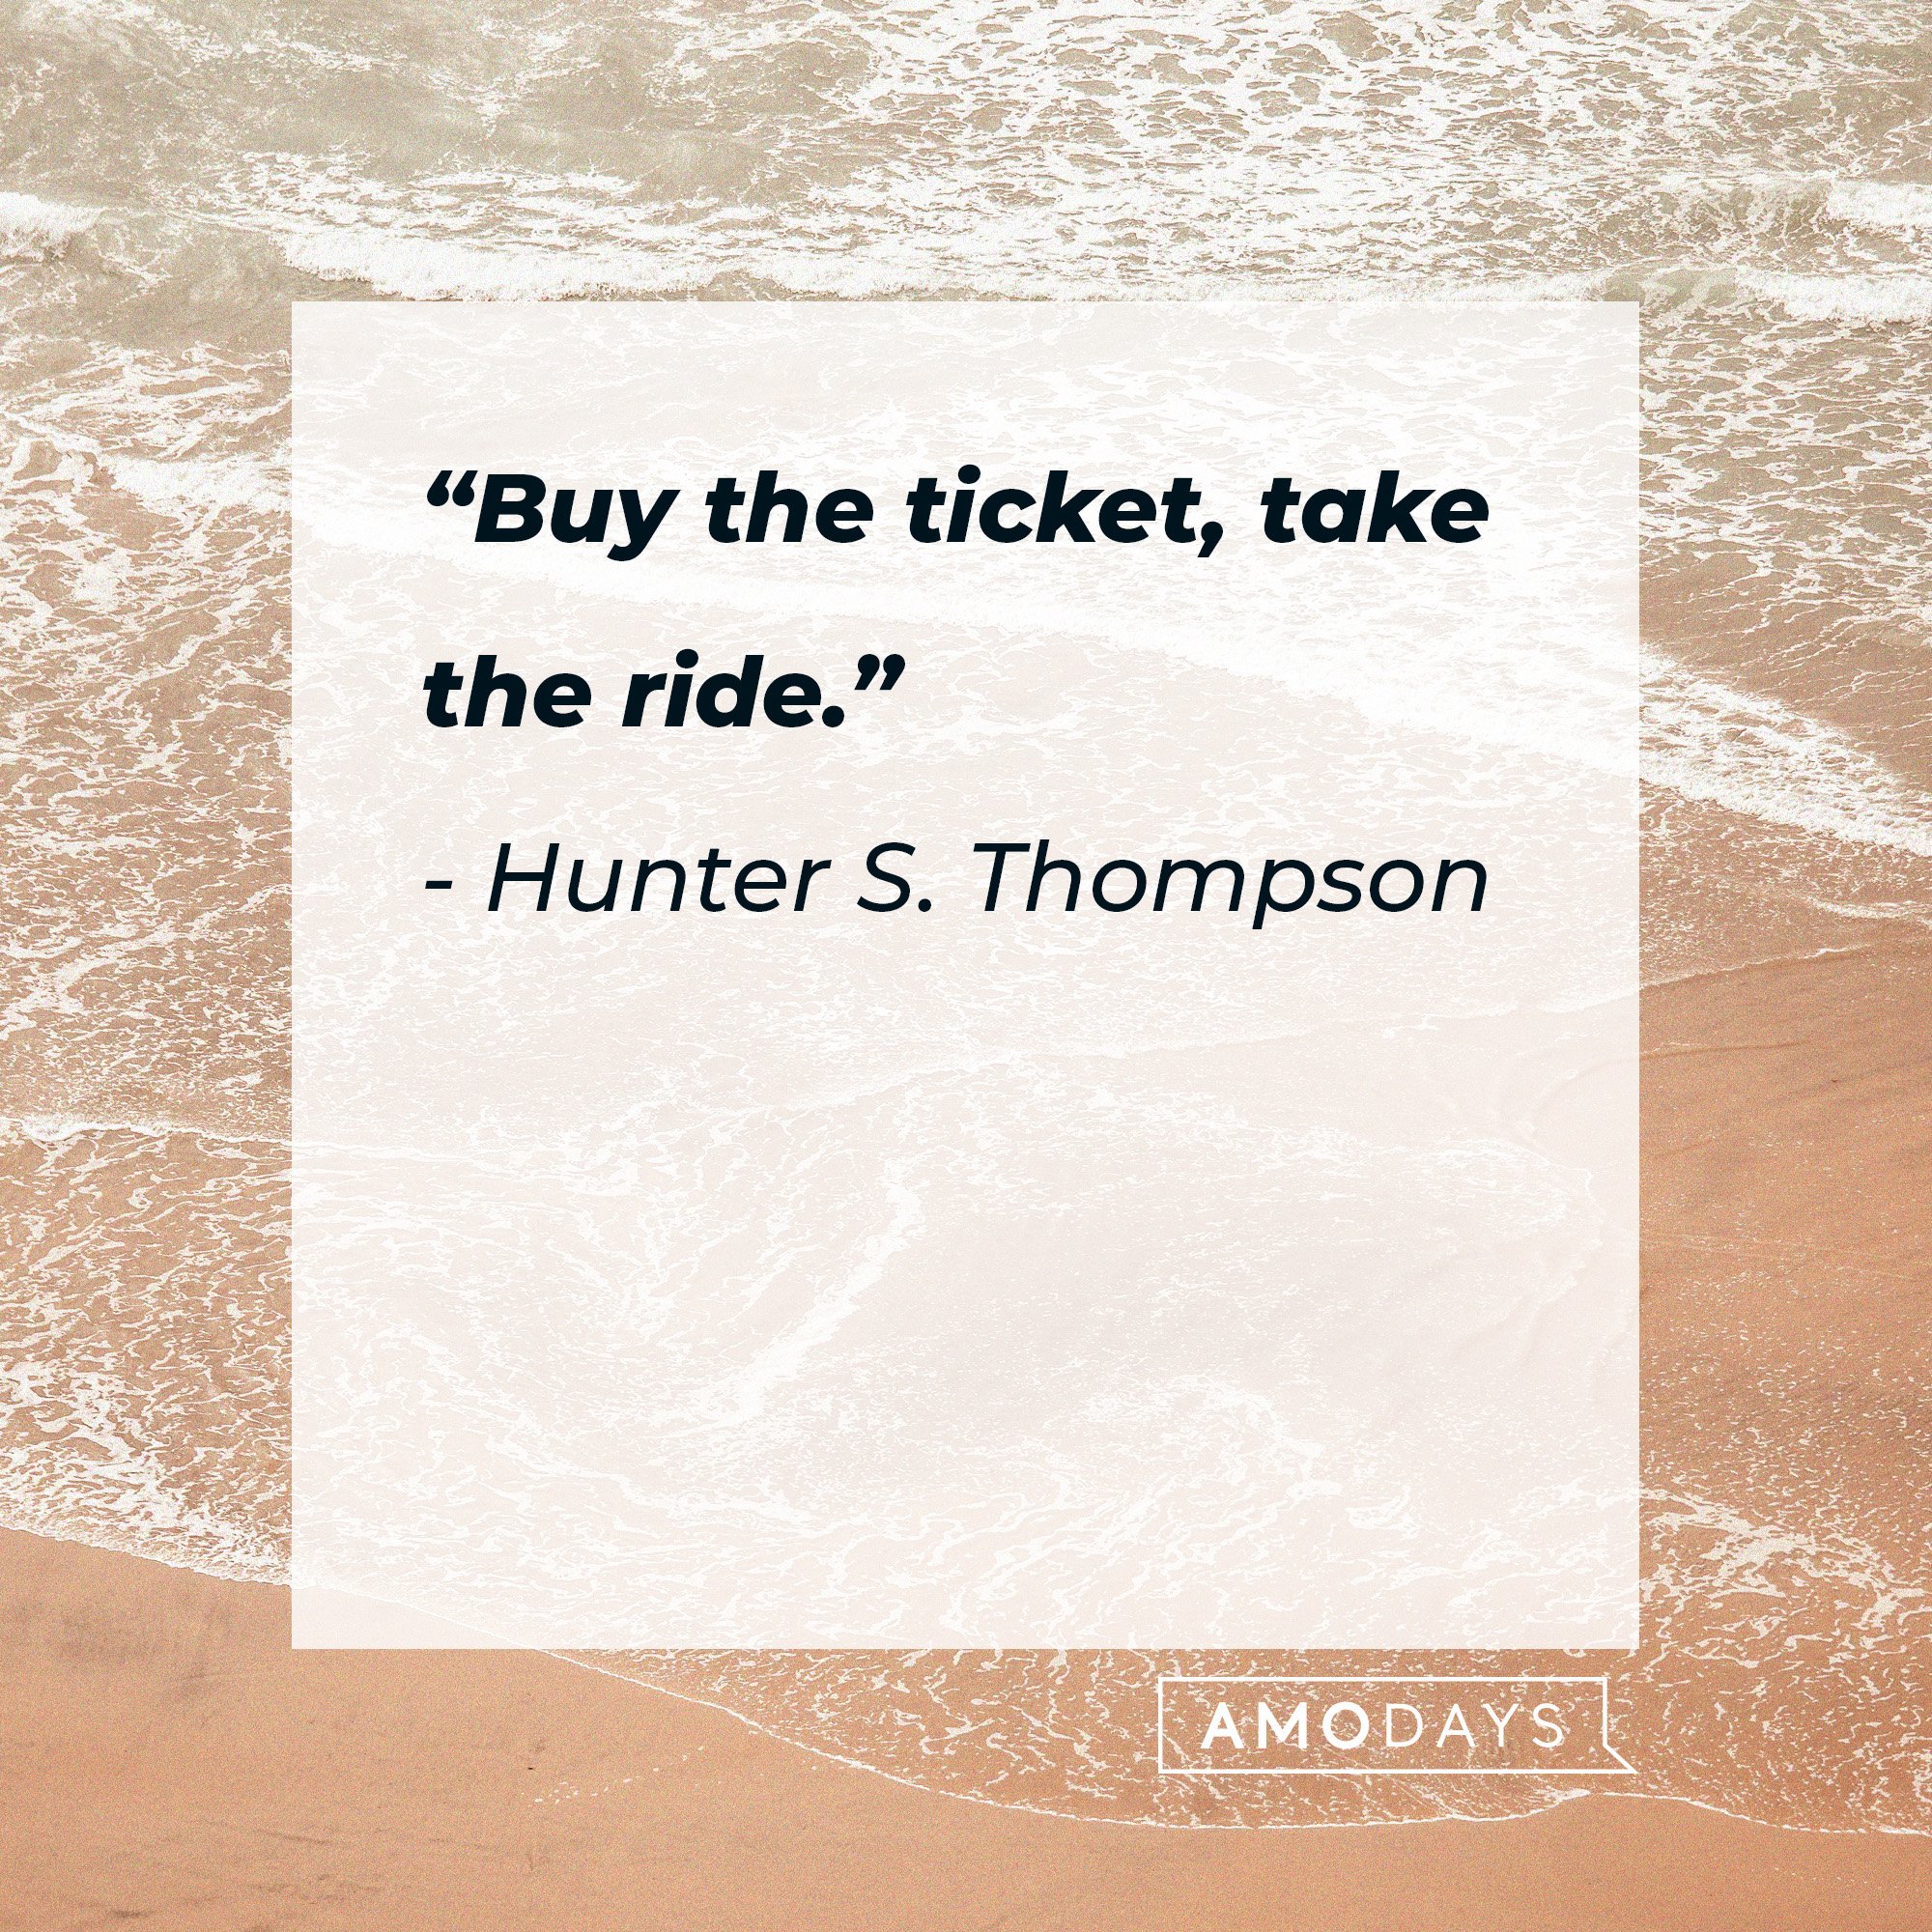 Hunter S. Thompson’s quote: “Buy the ticket, take the ride.” | Image: AmoDays